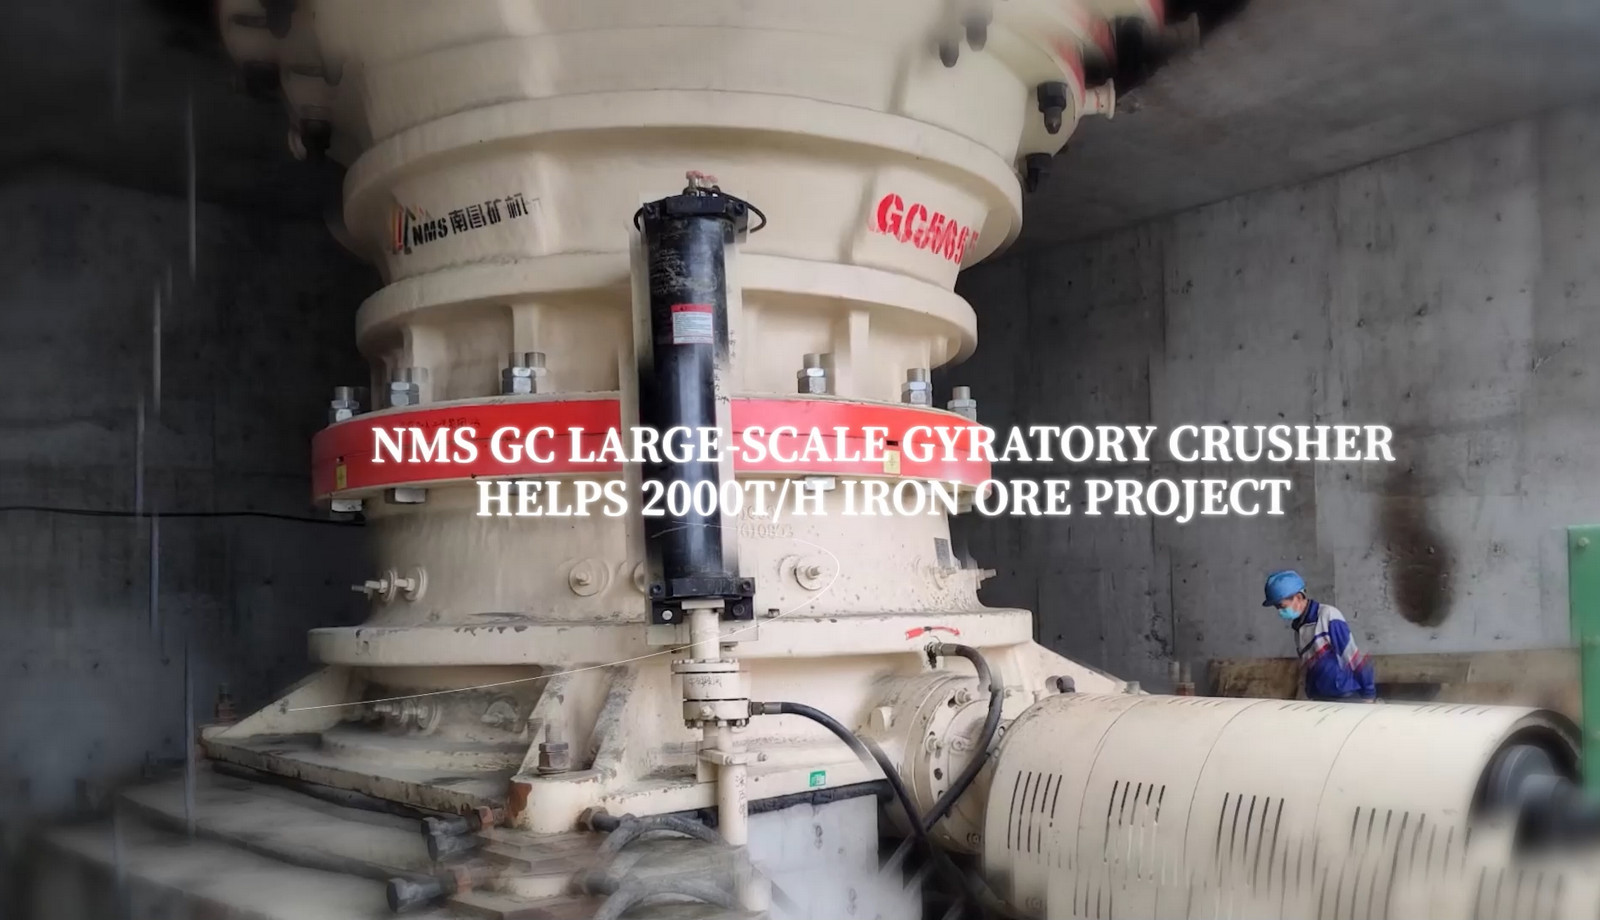 NMS GC Large-scale Gyratory Crusher Helps 2000t/h Iron Ore Project